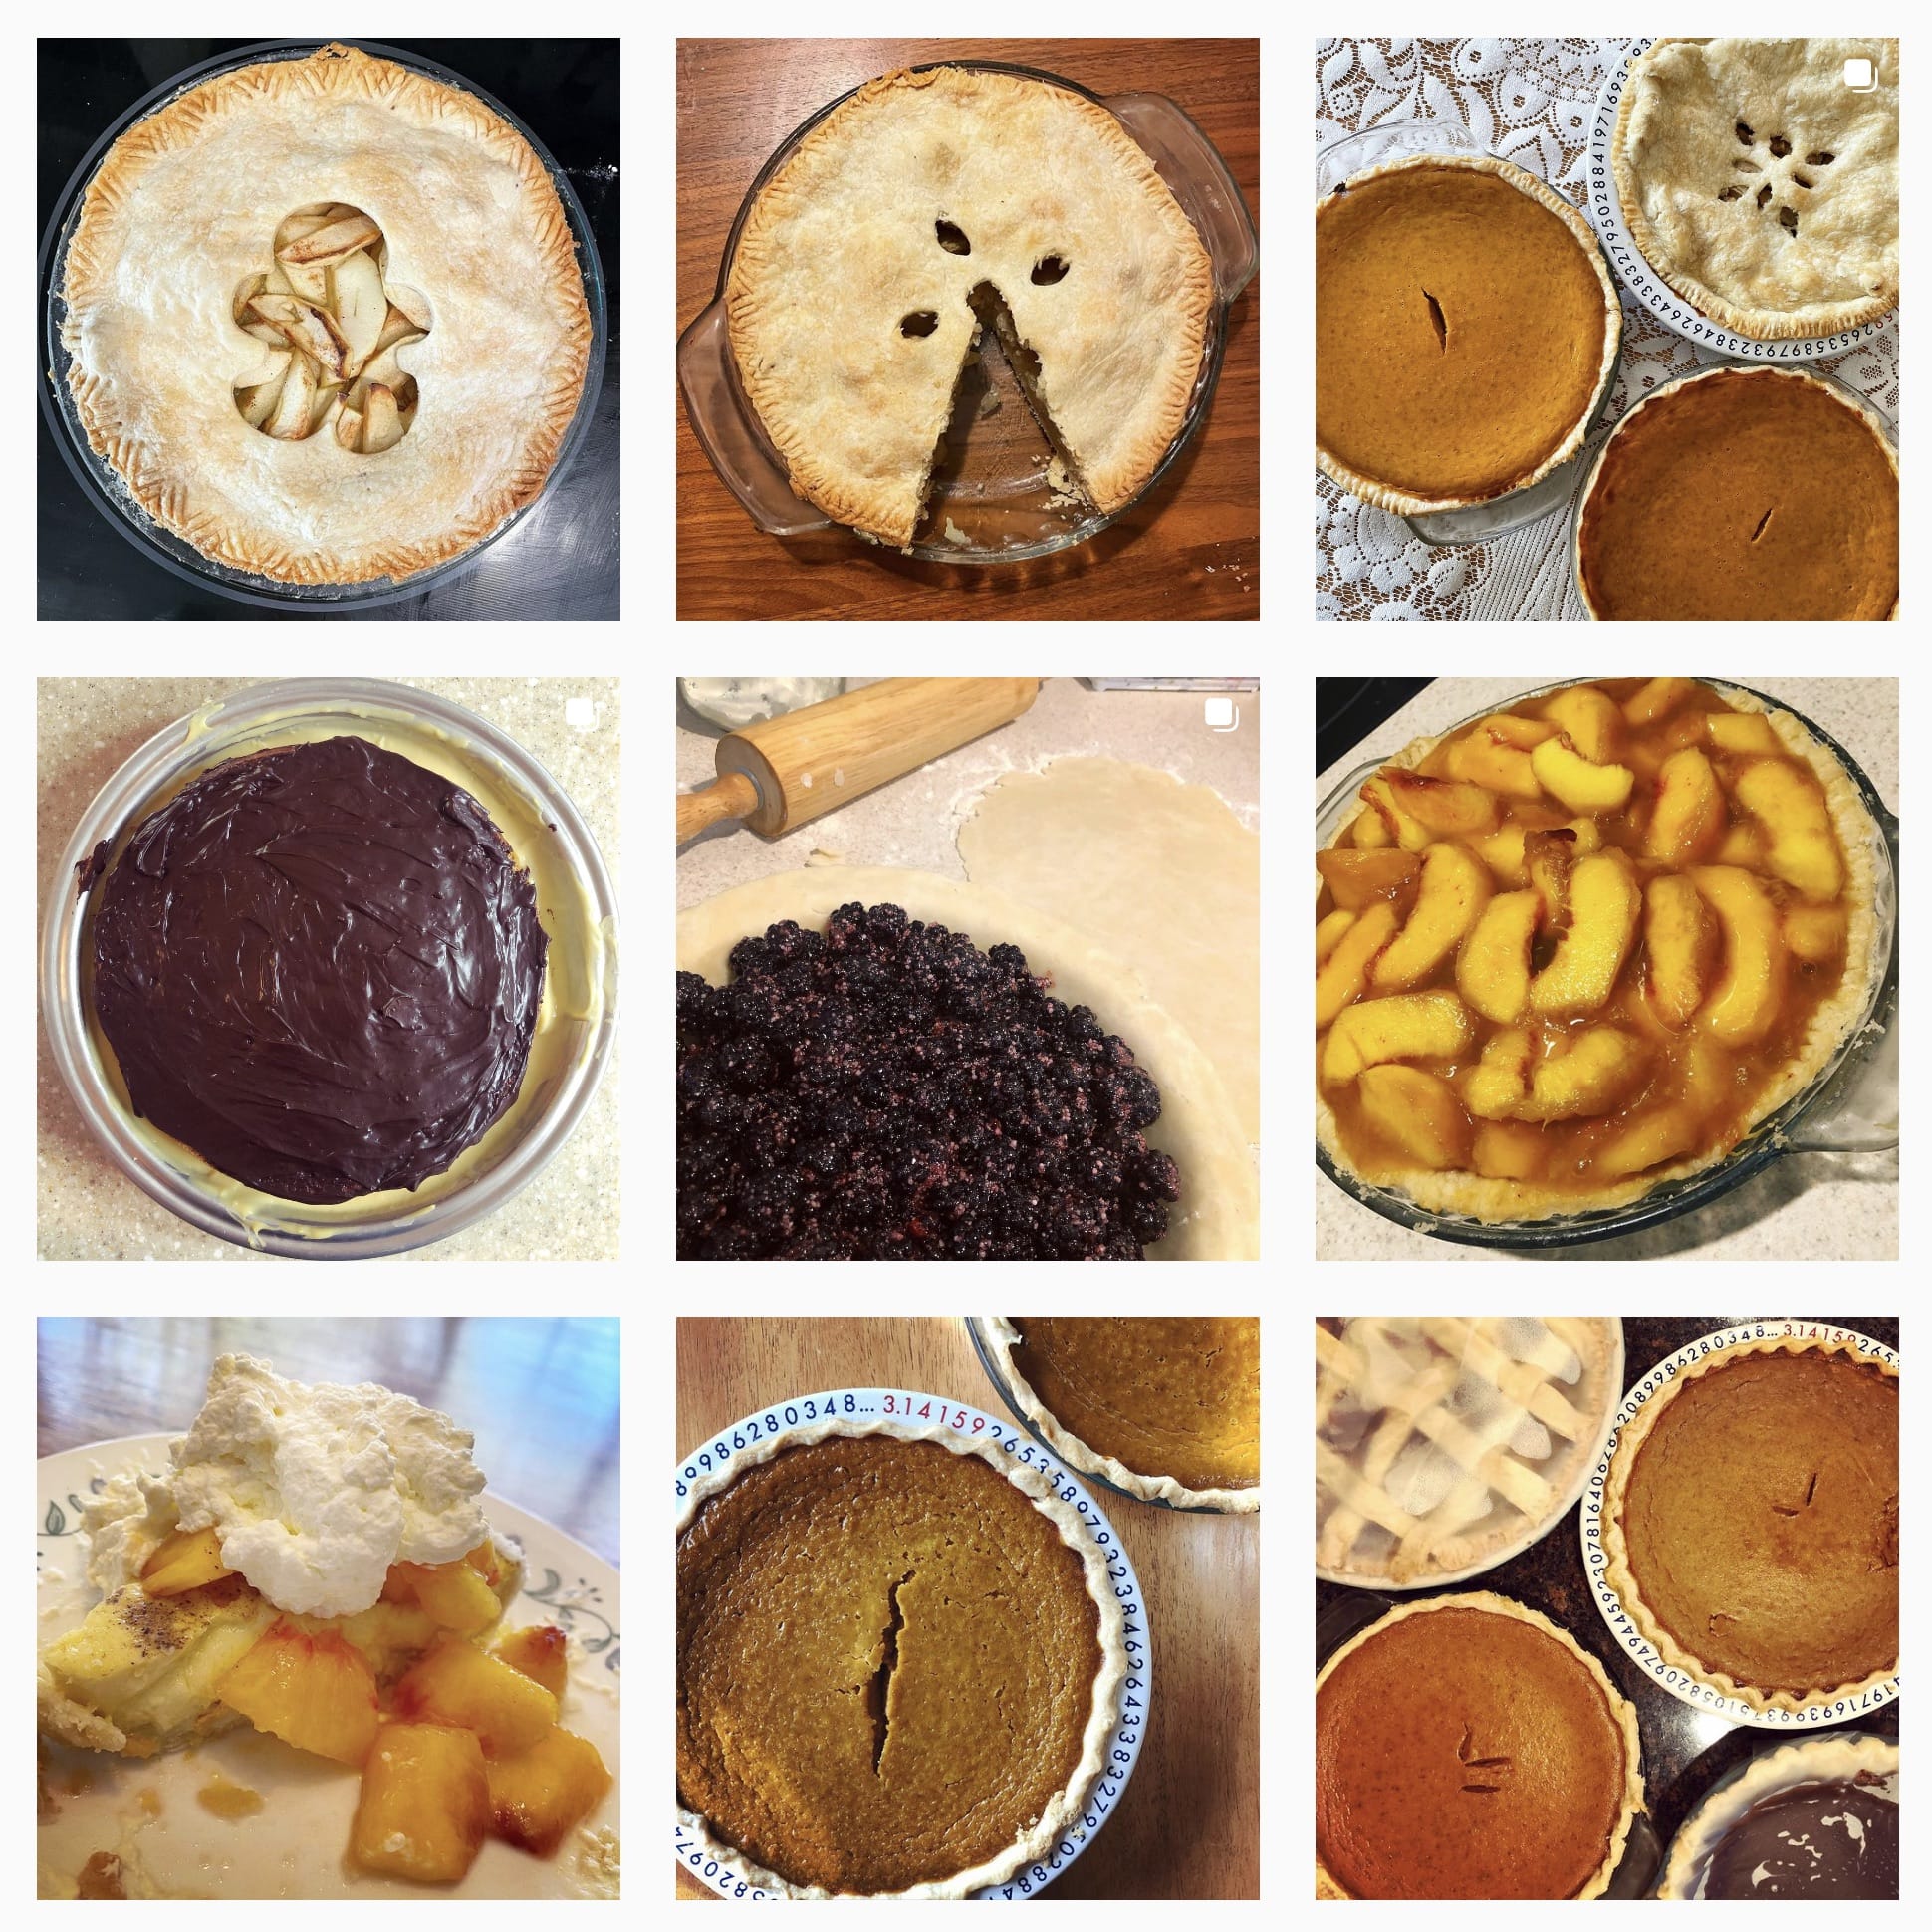 A collection of 9 photographs of different pies I’ve baked. Two are peach. One is blackberry. Three are pumpkin. One is apply. A few others are covered with crust making what kind of pie they are difficult to tell from the photograph alone.